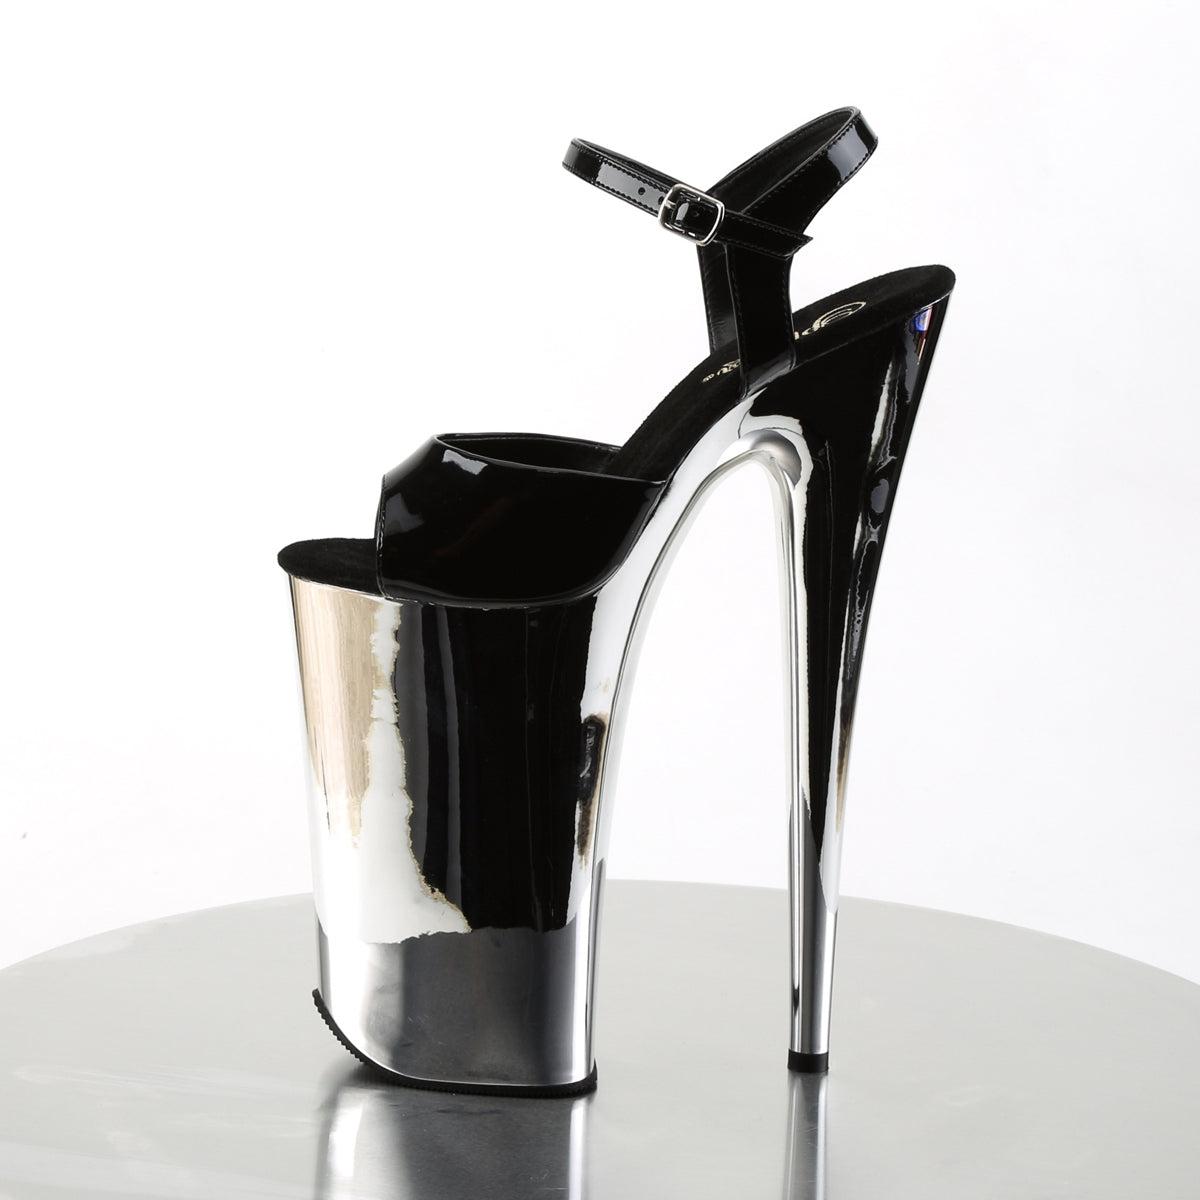 BEYOND-009 Sexy 10" Heel Black Silver Chrome Strippers Shoes-Pleaser- Sexy Shoes Pole Dance Heels